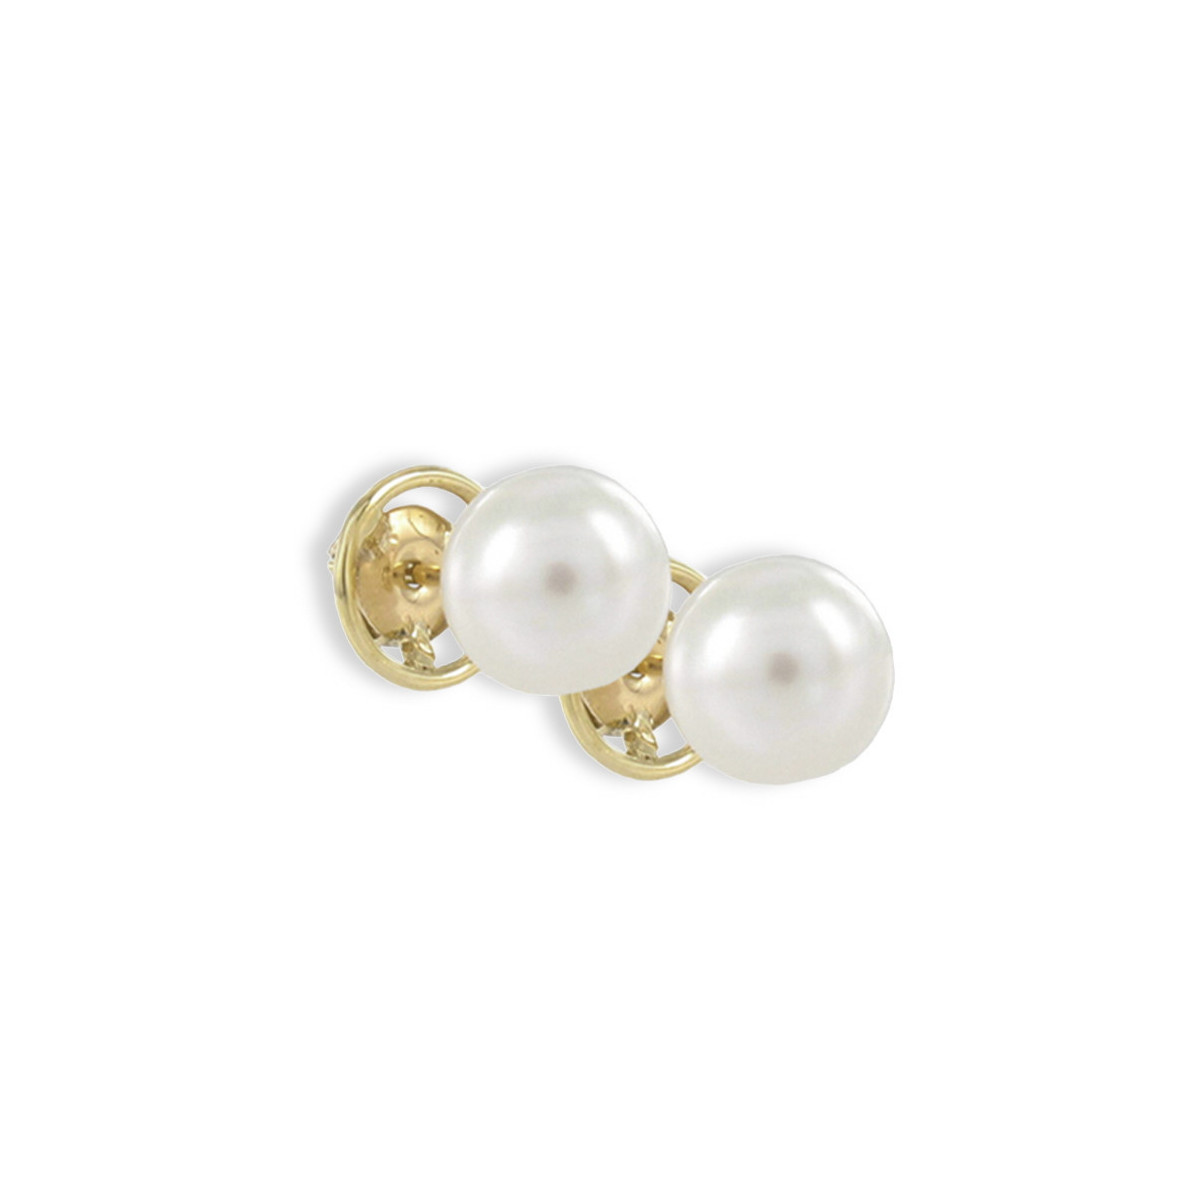 PEARL 11 MM AND GOLD EARRING